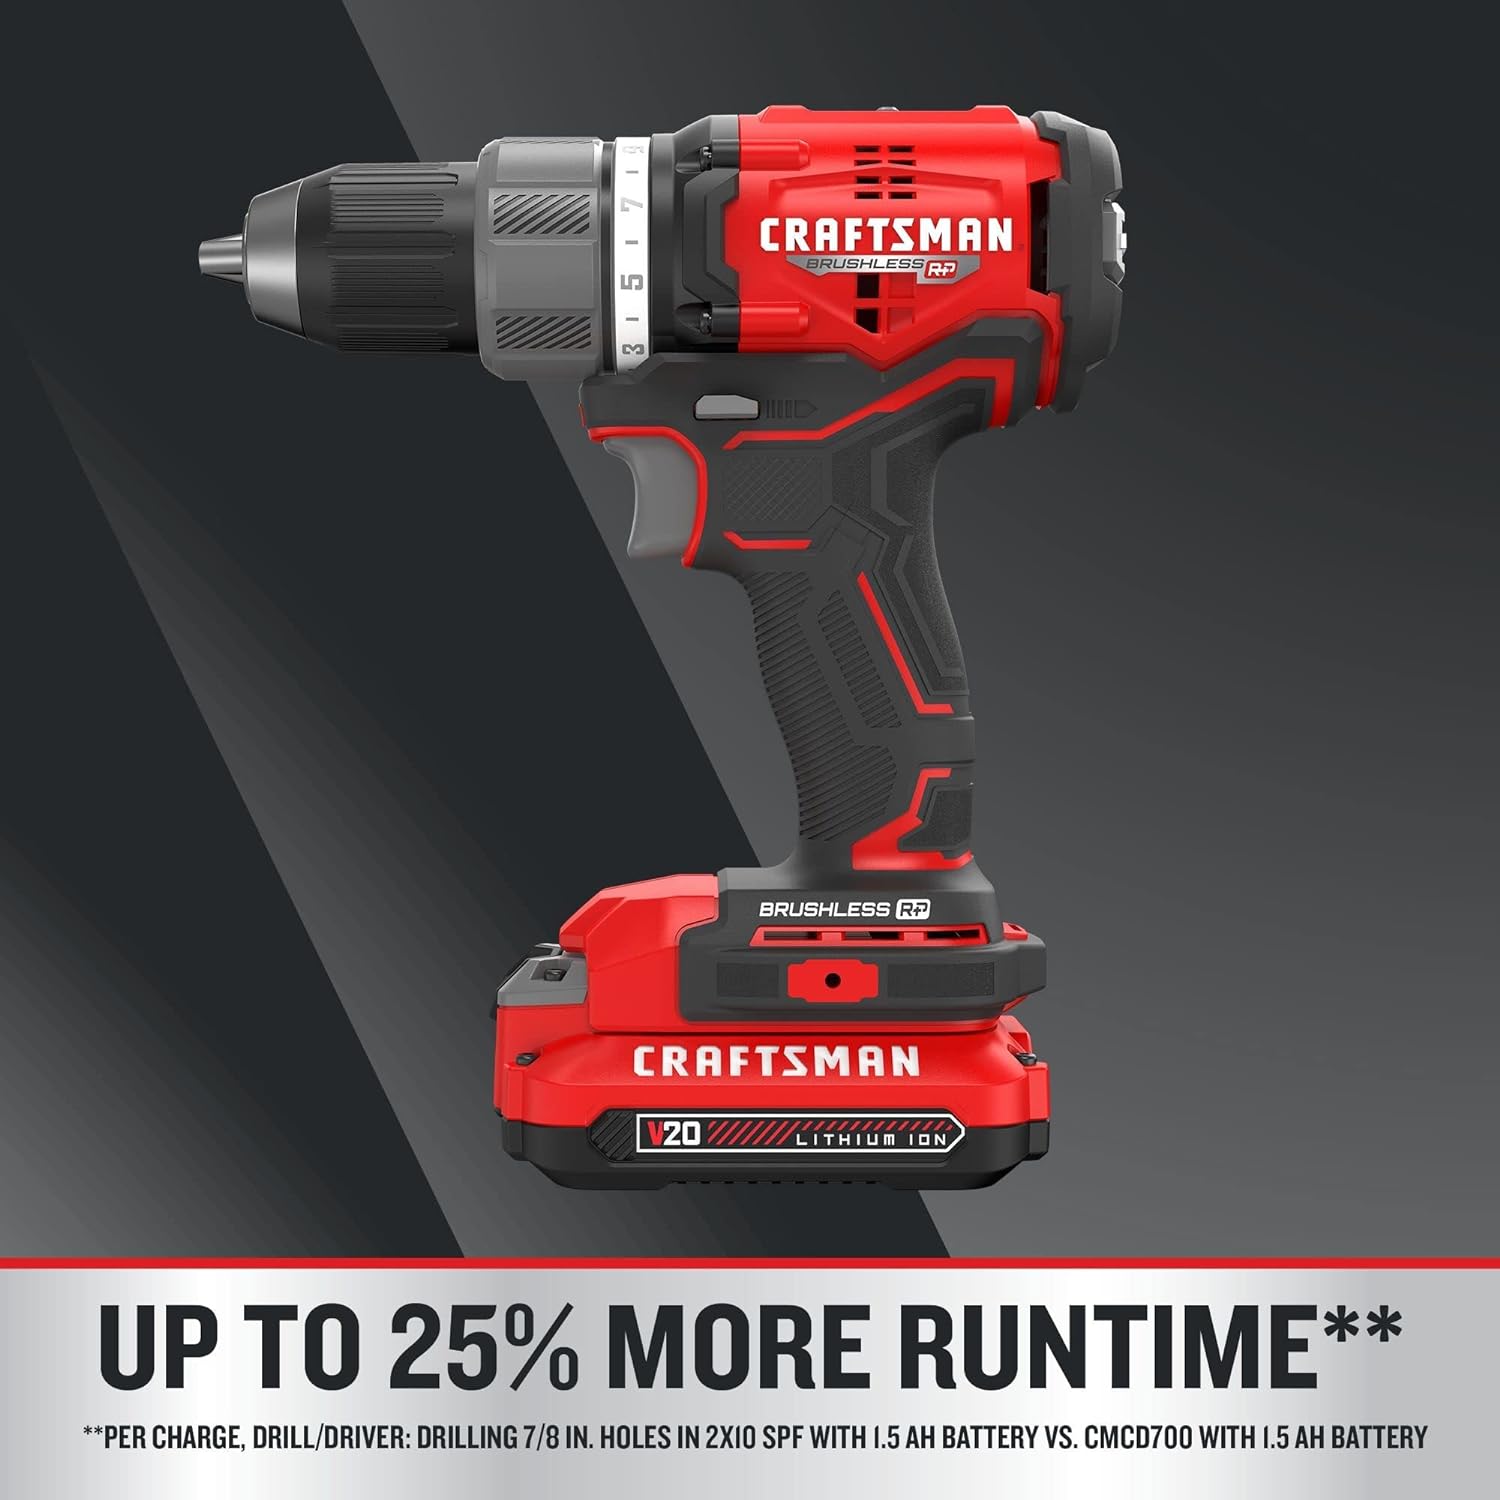 Craftsman V20 Rp Cordless Drill And Impact Driver, Power Tool Combo Kit, 2 Batteries And Charger Included (Cmck211C2)